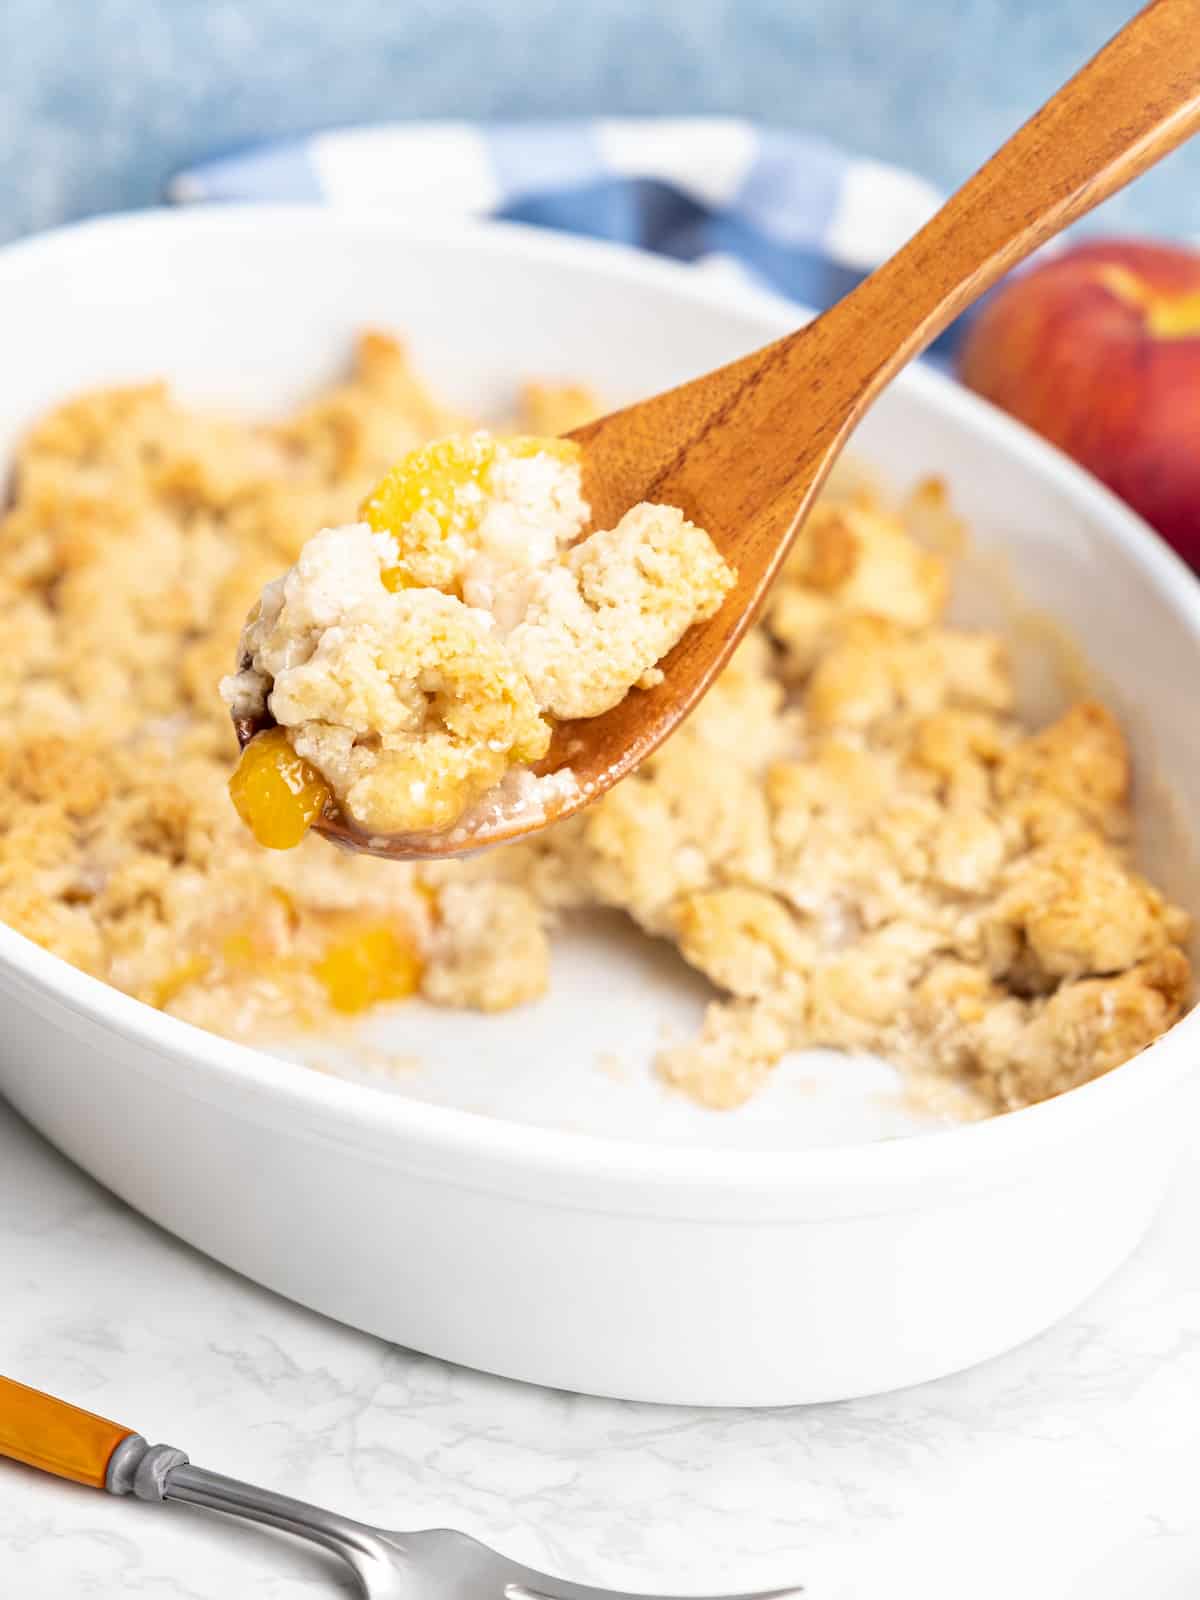 A wooden spoon lifts a serving of peach cobbler out of an oval baking dish.